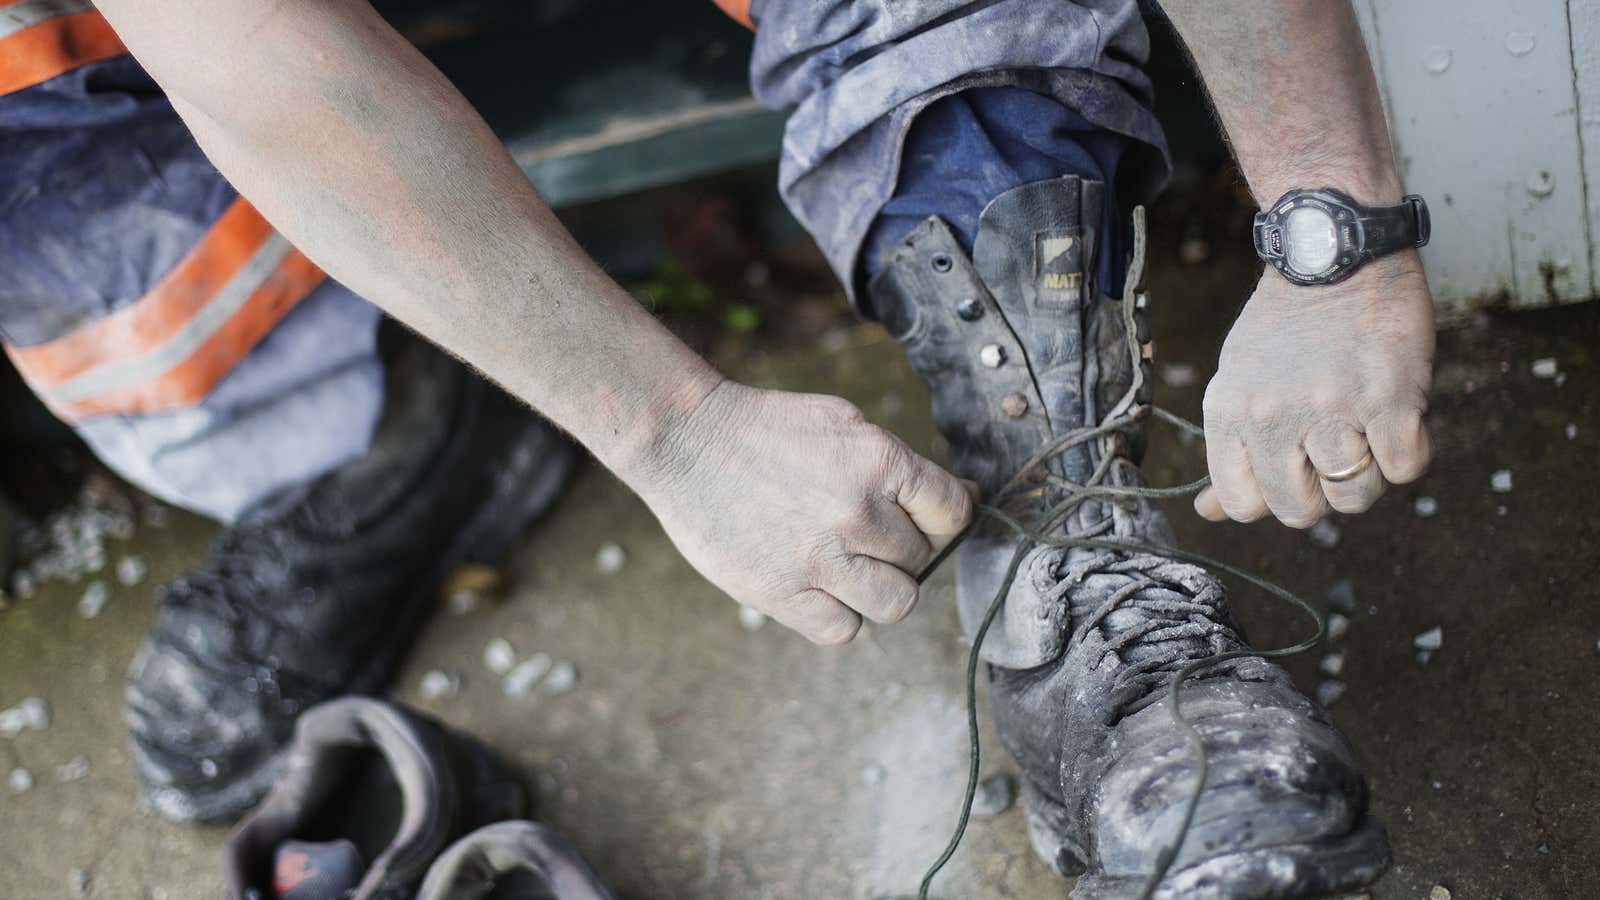 A Kentucky coal miner removes boots covered in toxic coal dust.